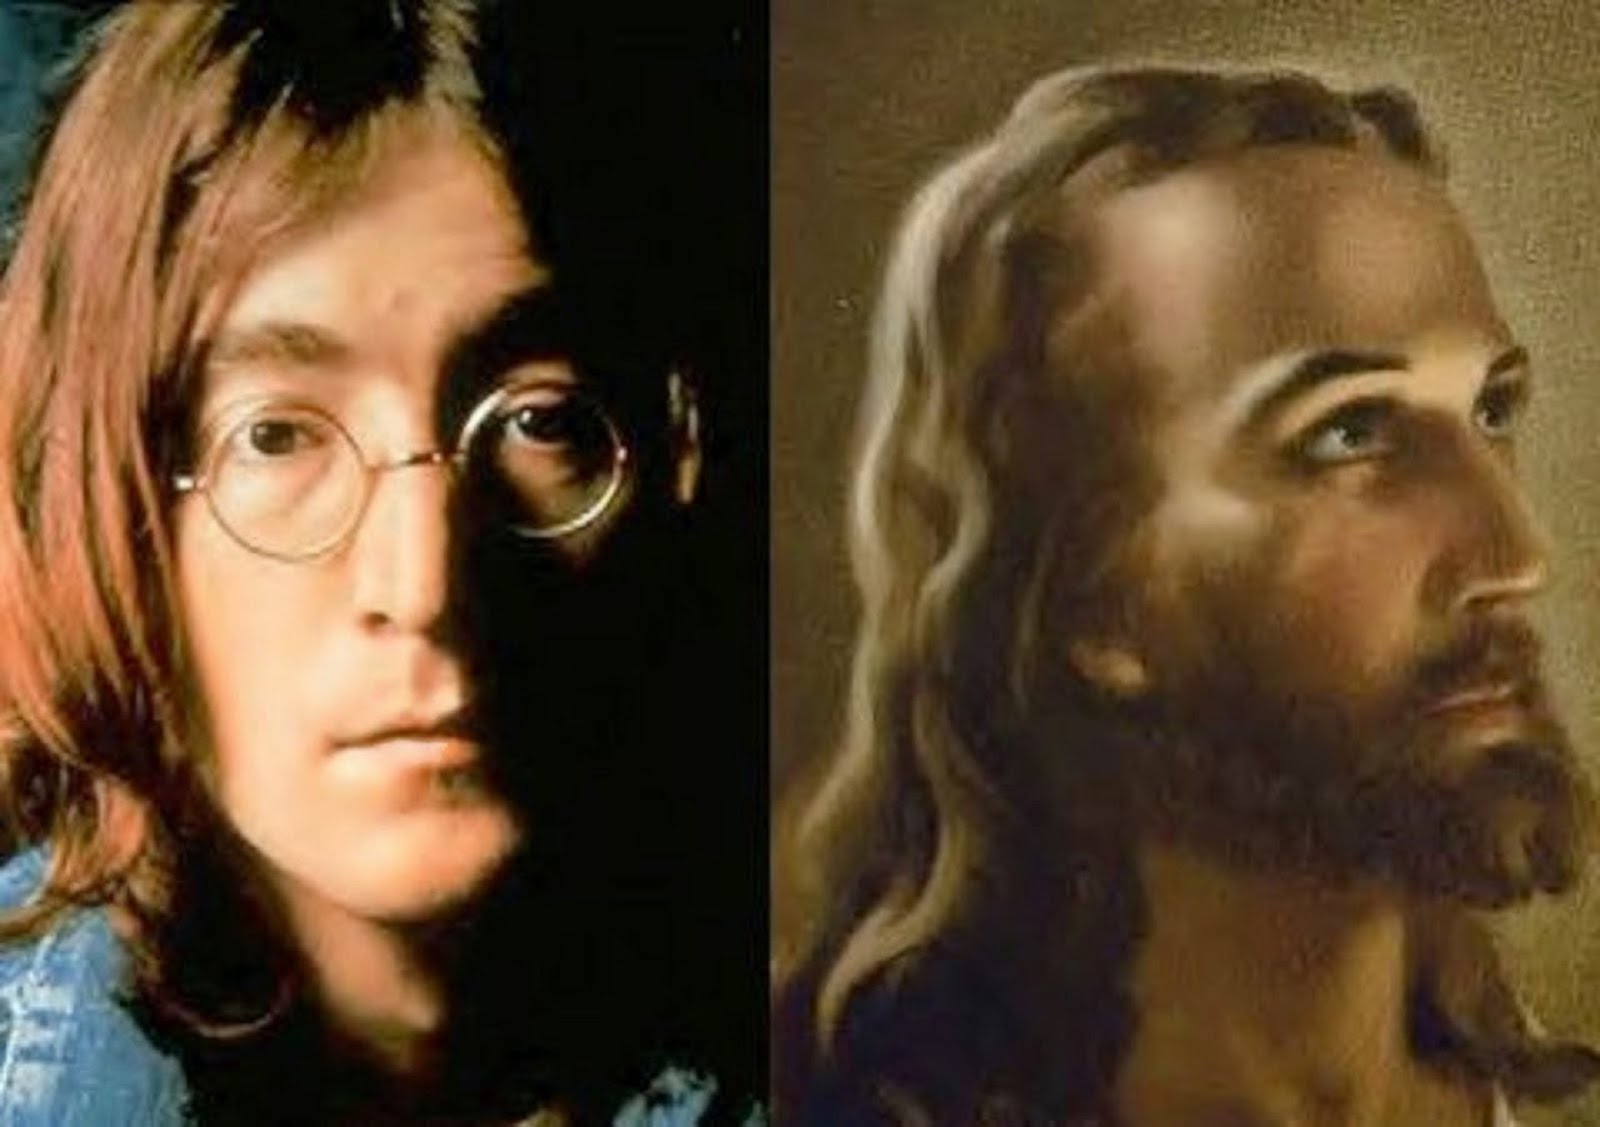 BEATLE JOHN LENNON VS JESUS CHRIST - PEOPLE WHO THOUGHT THEY WERE GOD